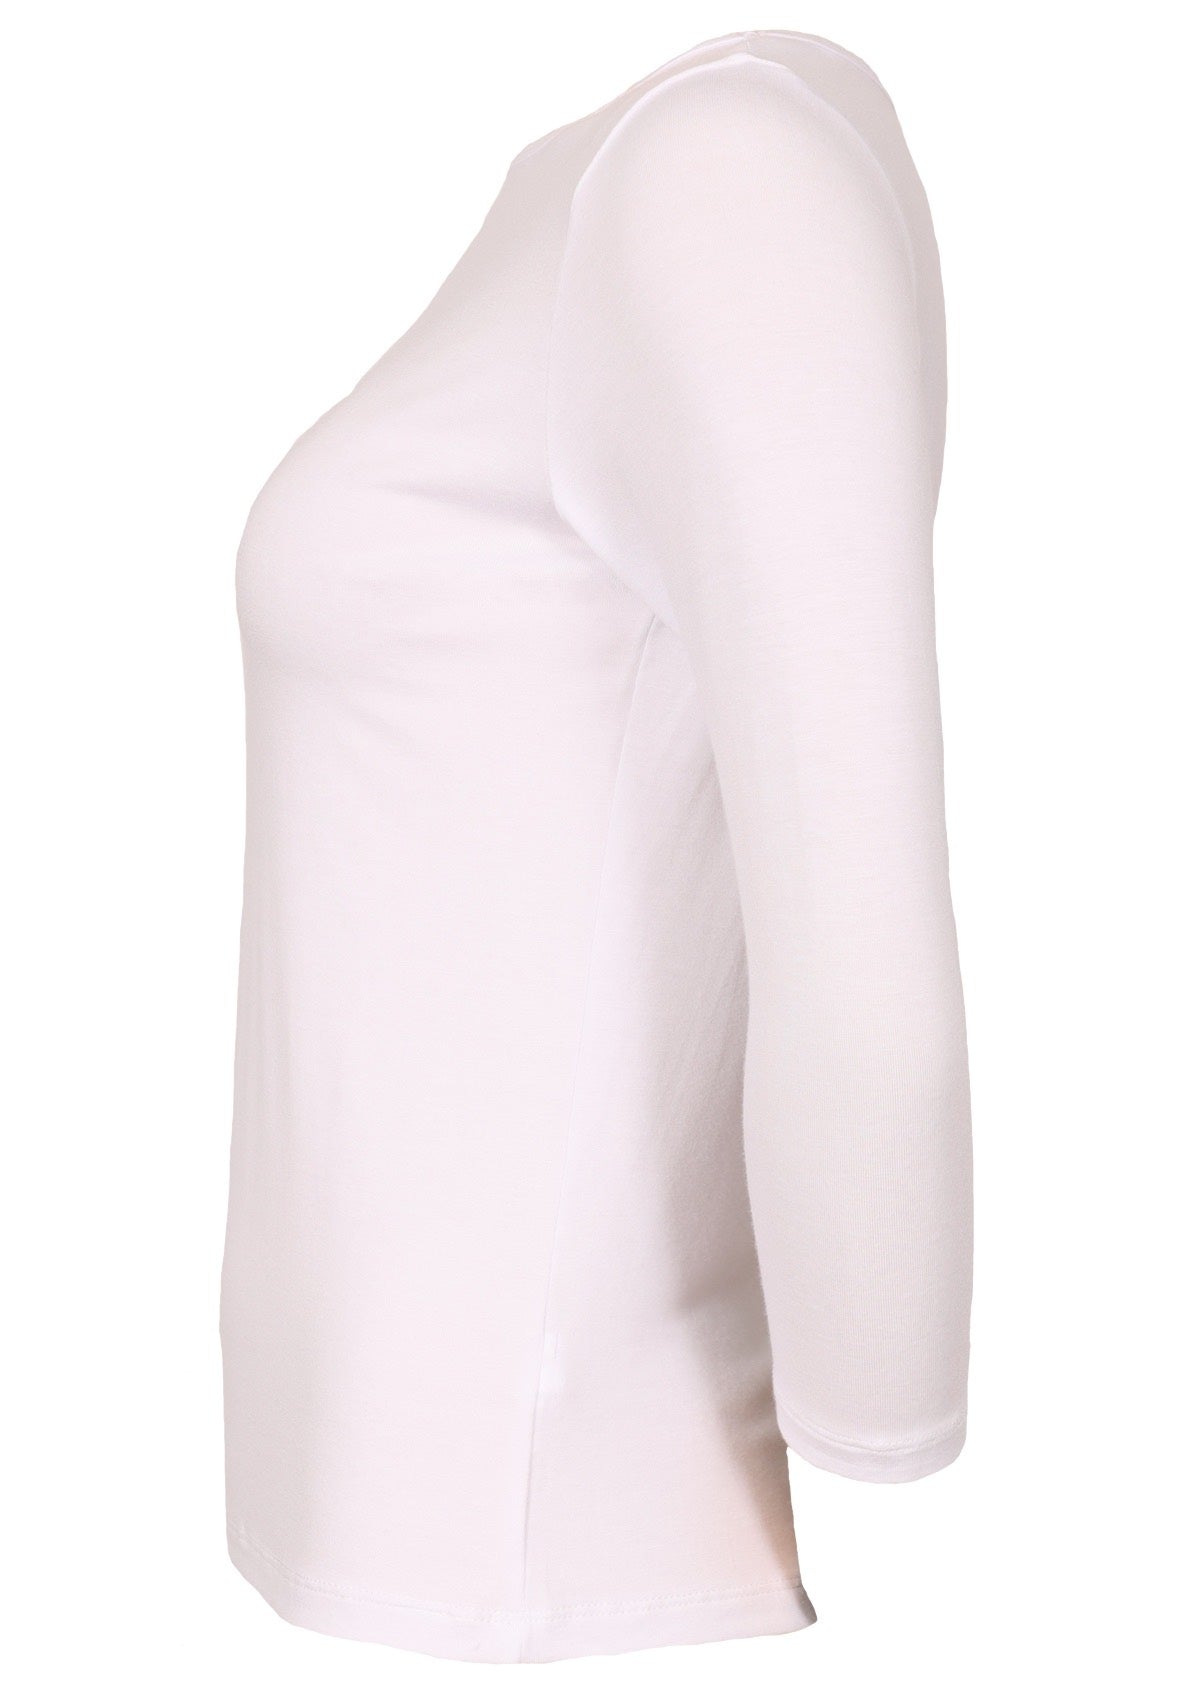 Side view of women's rayon boat neck white 3/4 sleeve top.